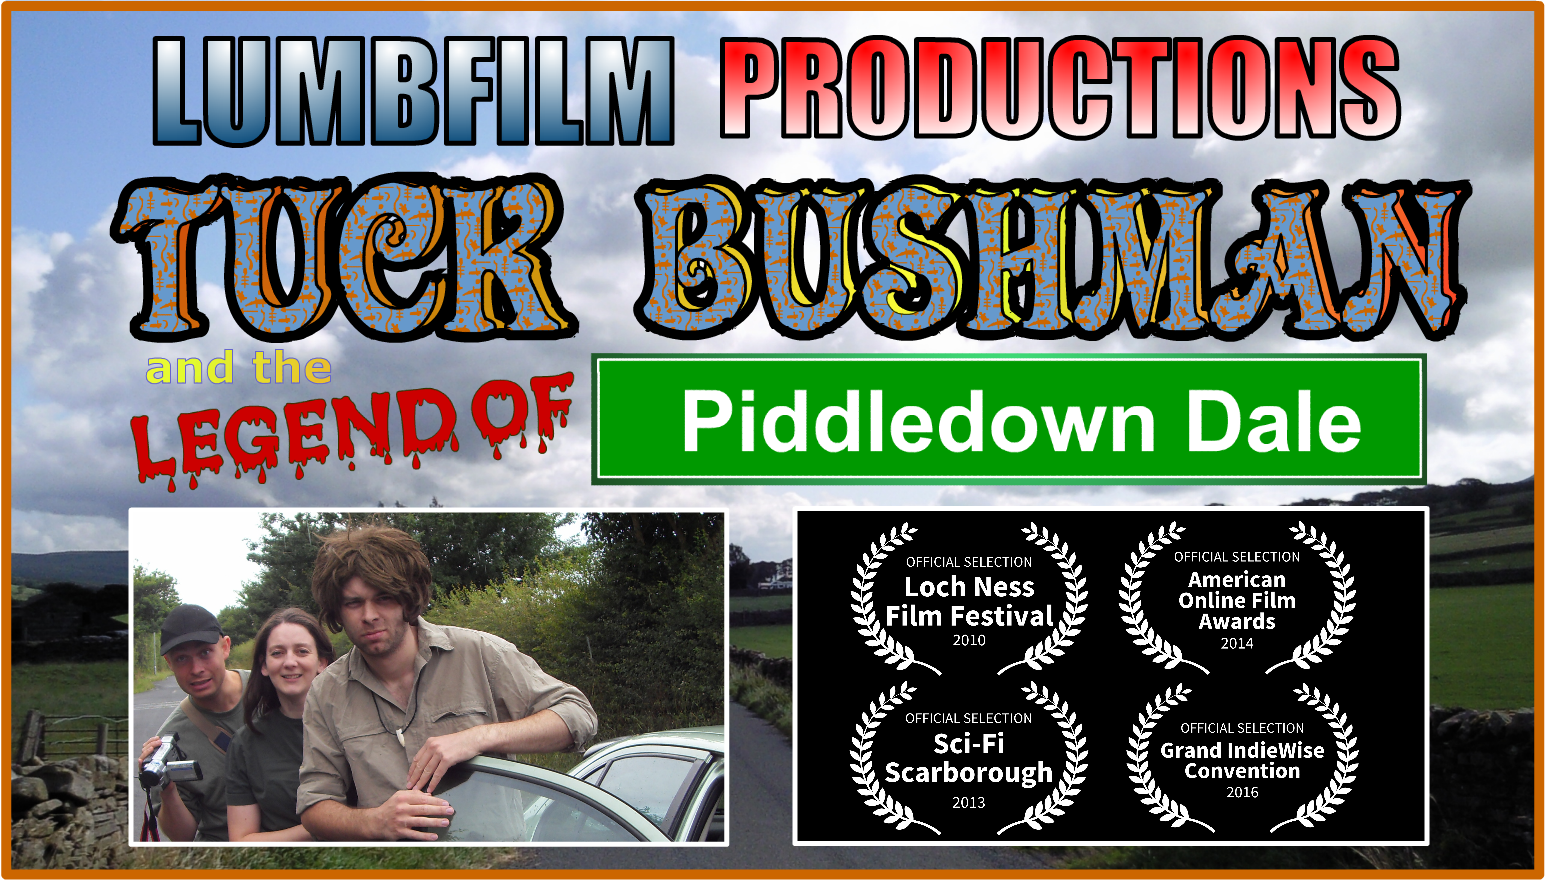 Comedy Feature Film "Tuck Bushman and the Legend of Piddledown Dale" by Lumbfilm Productions